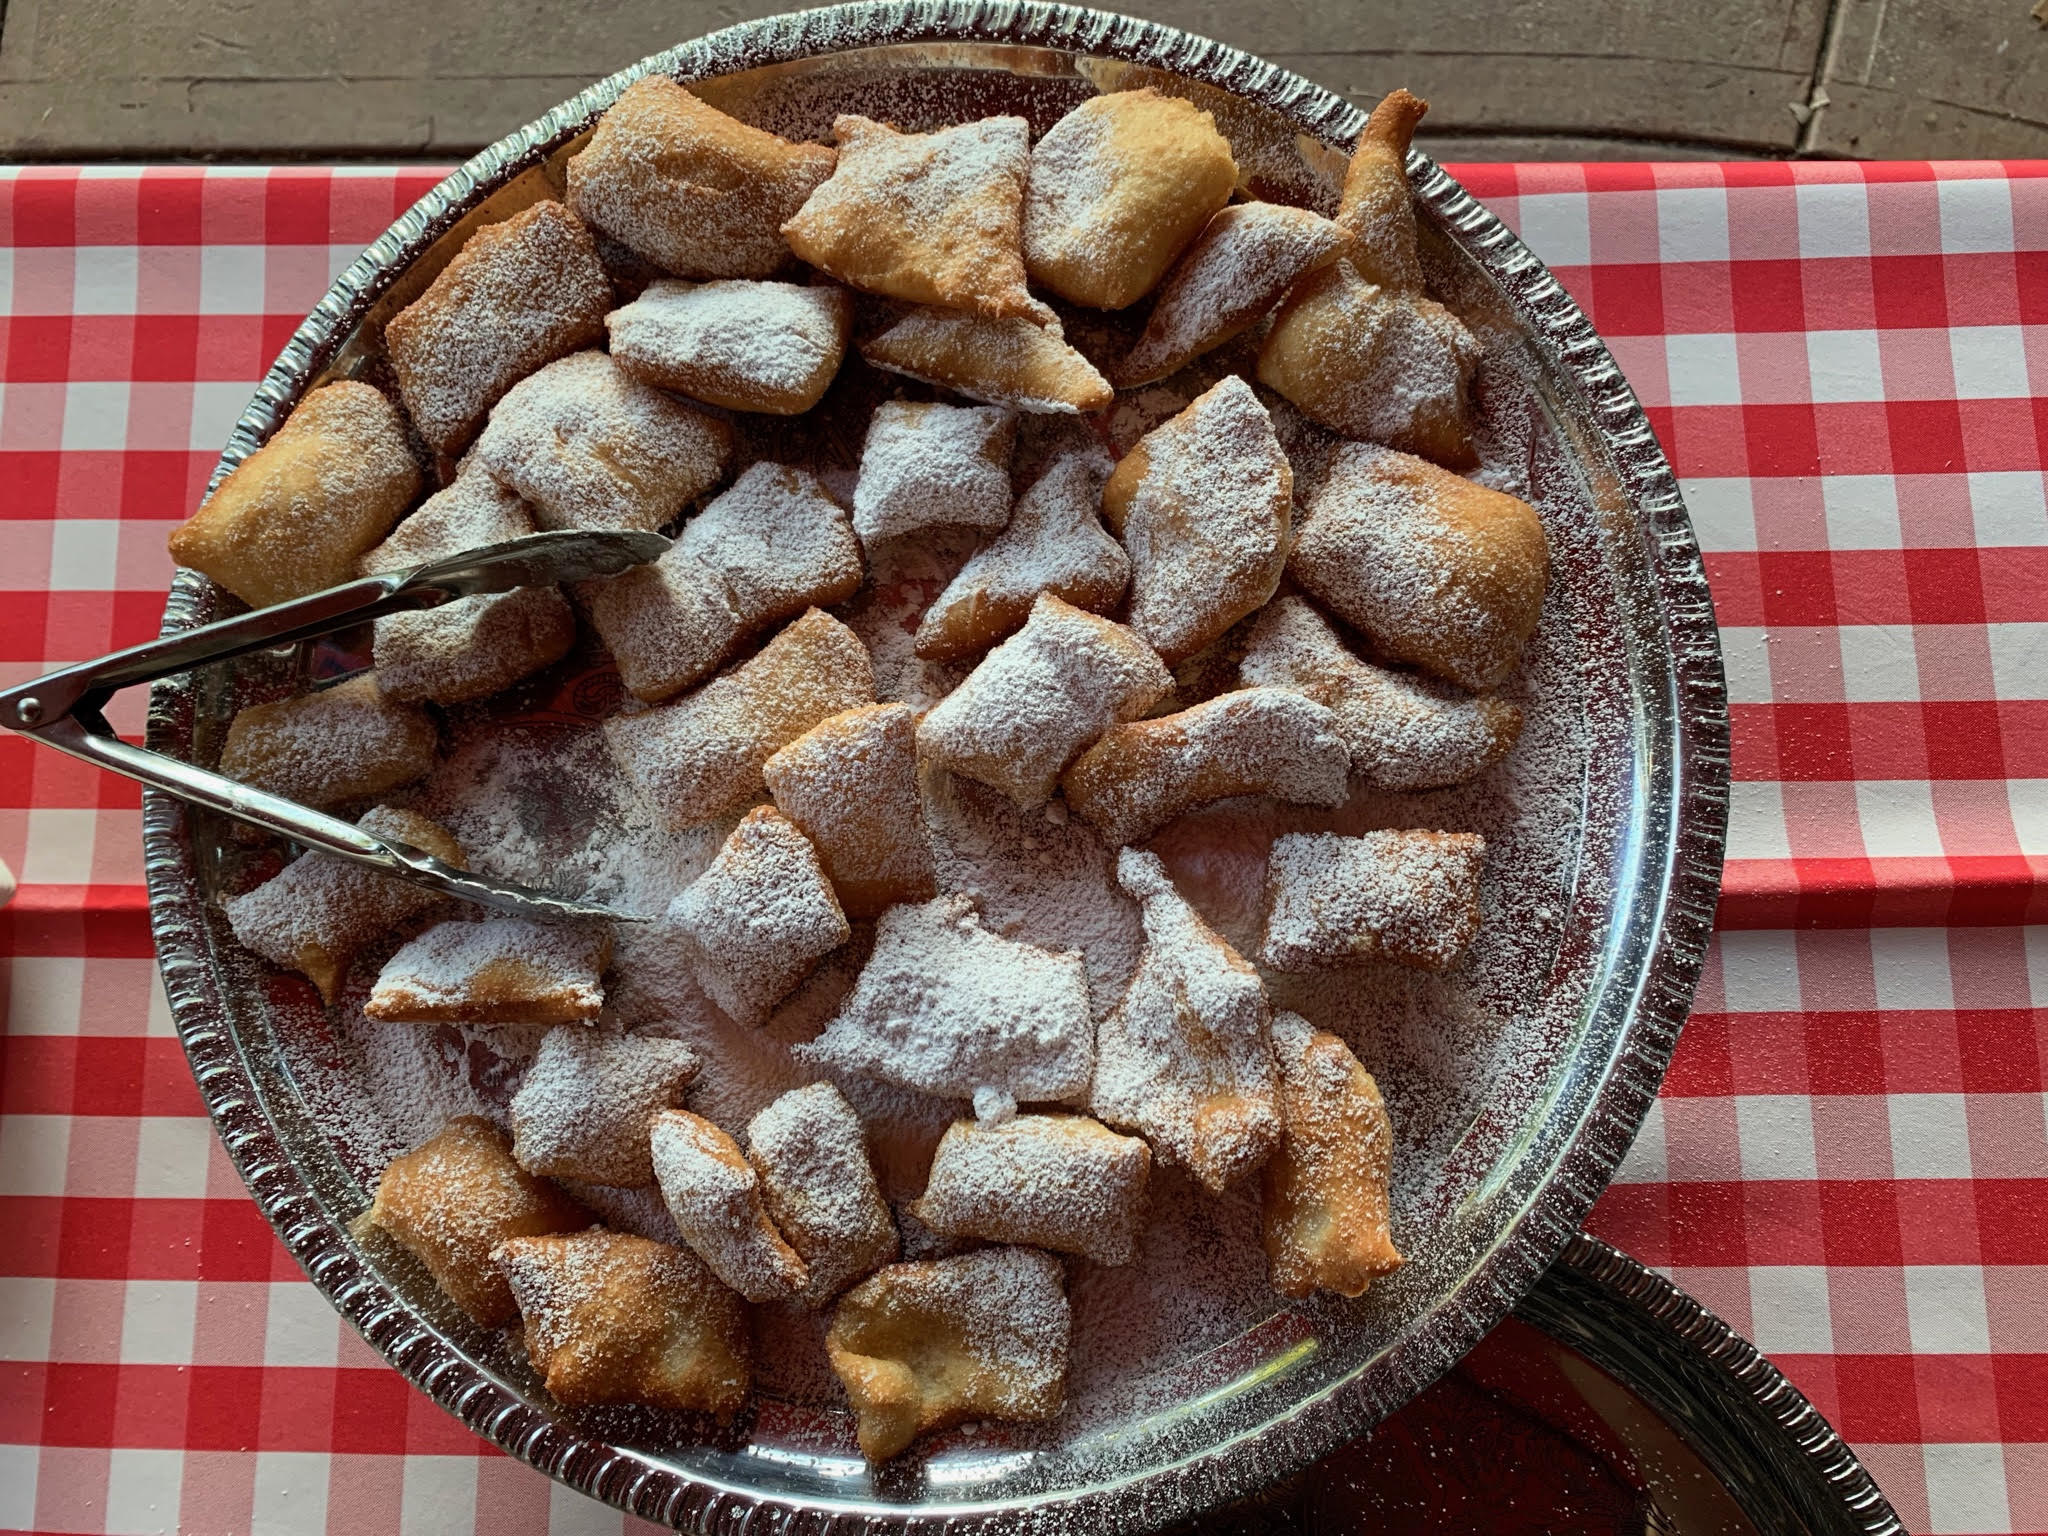 Large bowl of beignets covered in powdered sugar